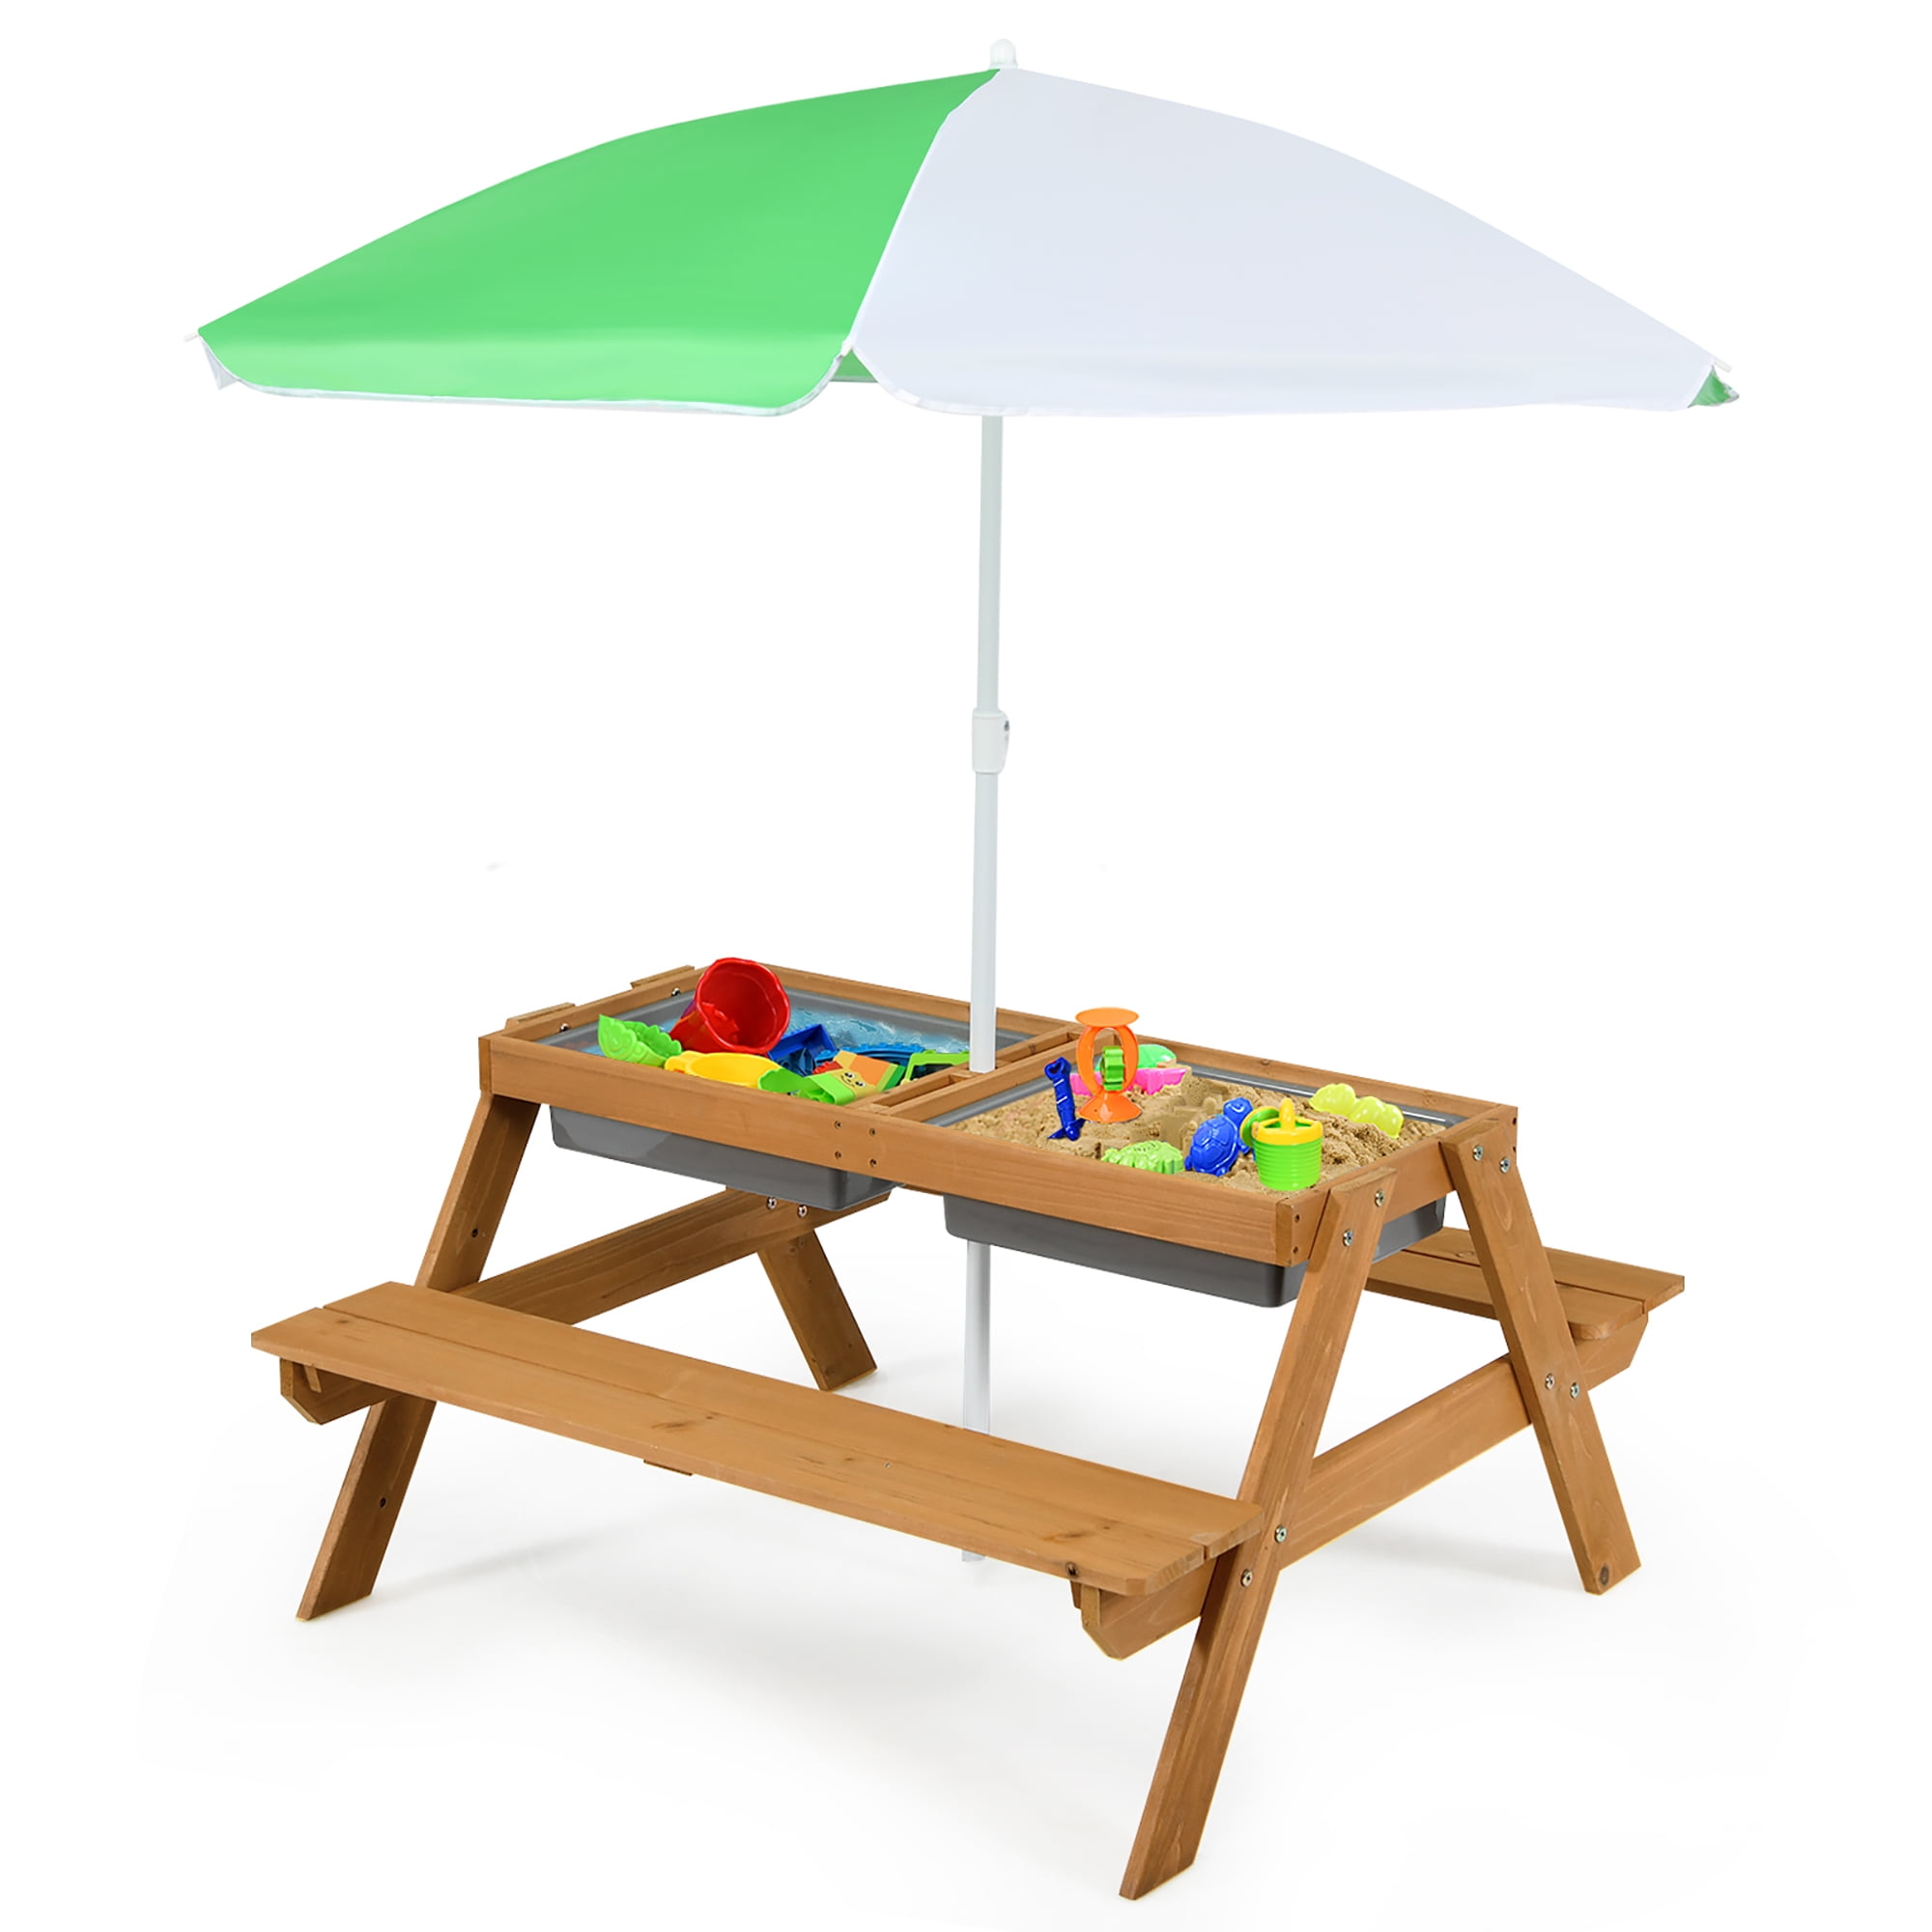 Champagne Illusion Postal code Babyjoy 3-in-1 Kids Picnic Table Outdoor Water Sand Table w/ Umbrella Play  Boxes - Walmart.com